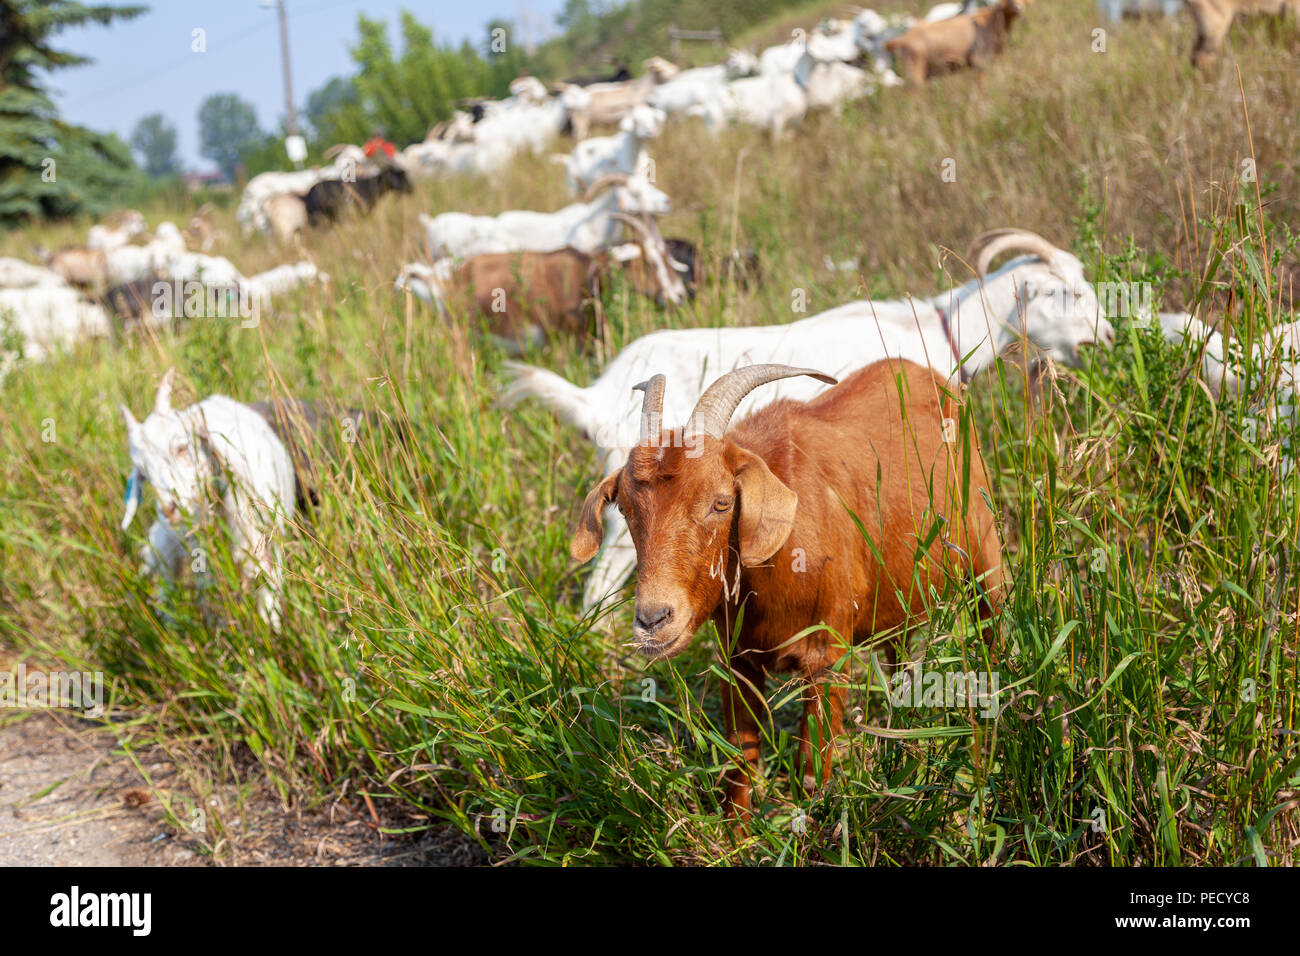 Goats eating up weeds in a Calgary park as part of the city's targeted grazing plan for invasive weed species management using environmentally friendl Stock Photo